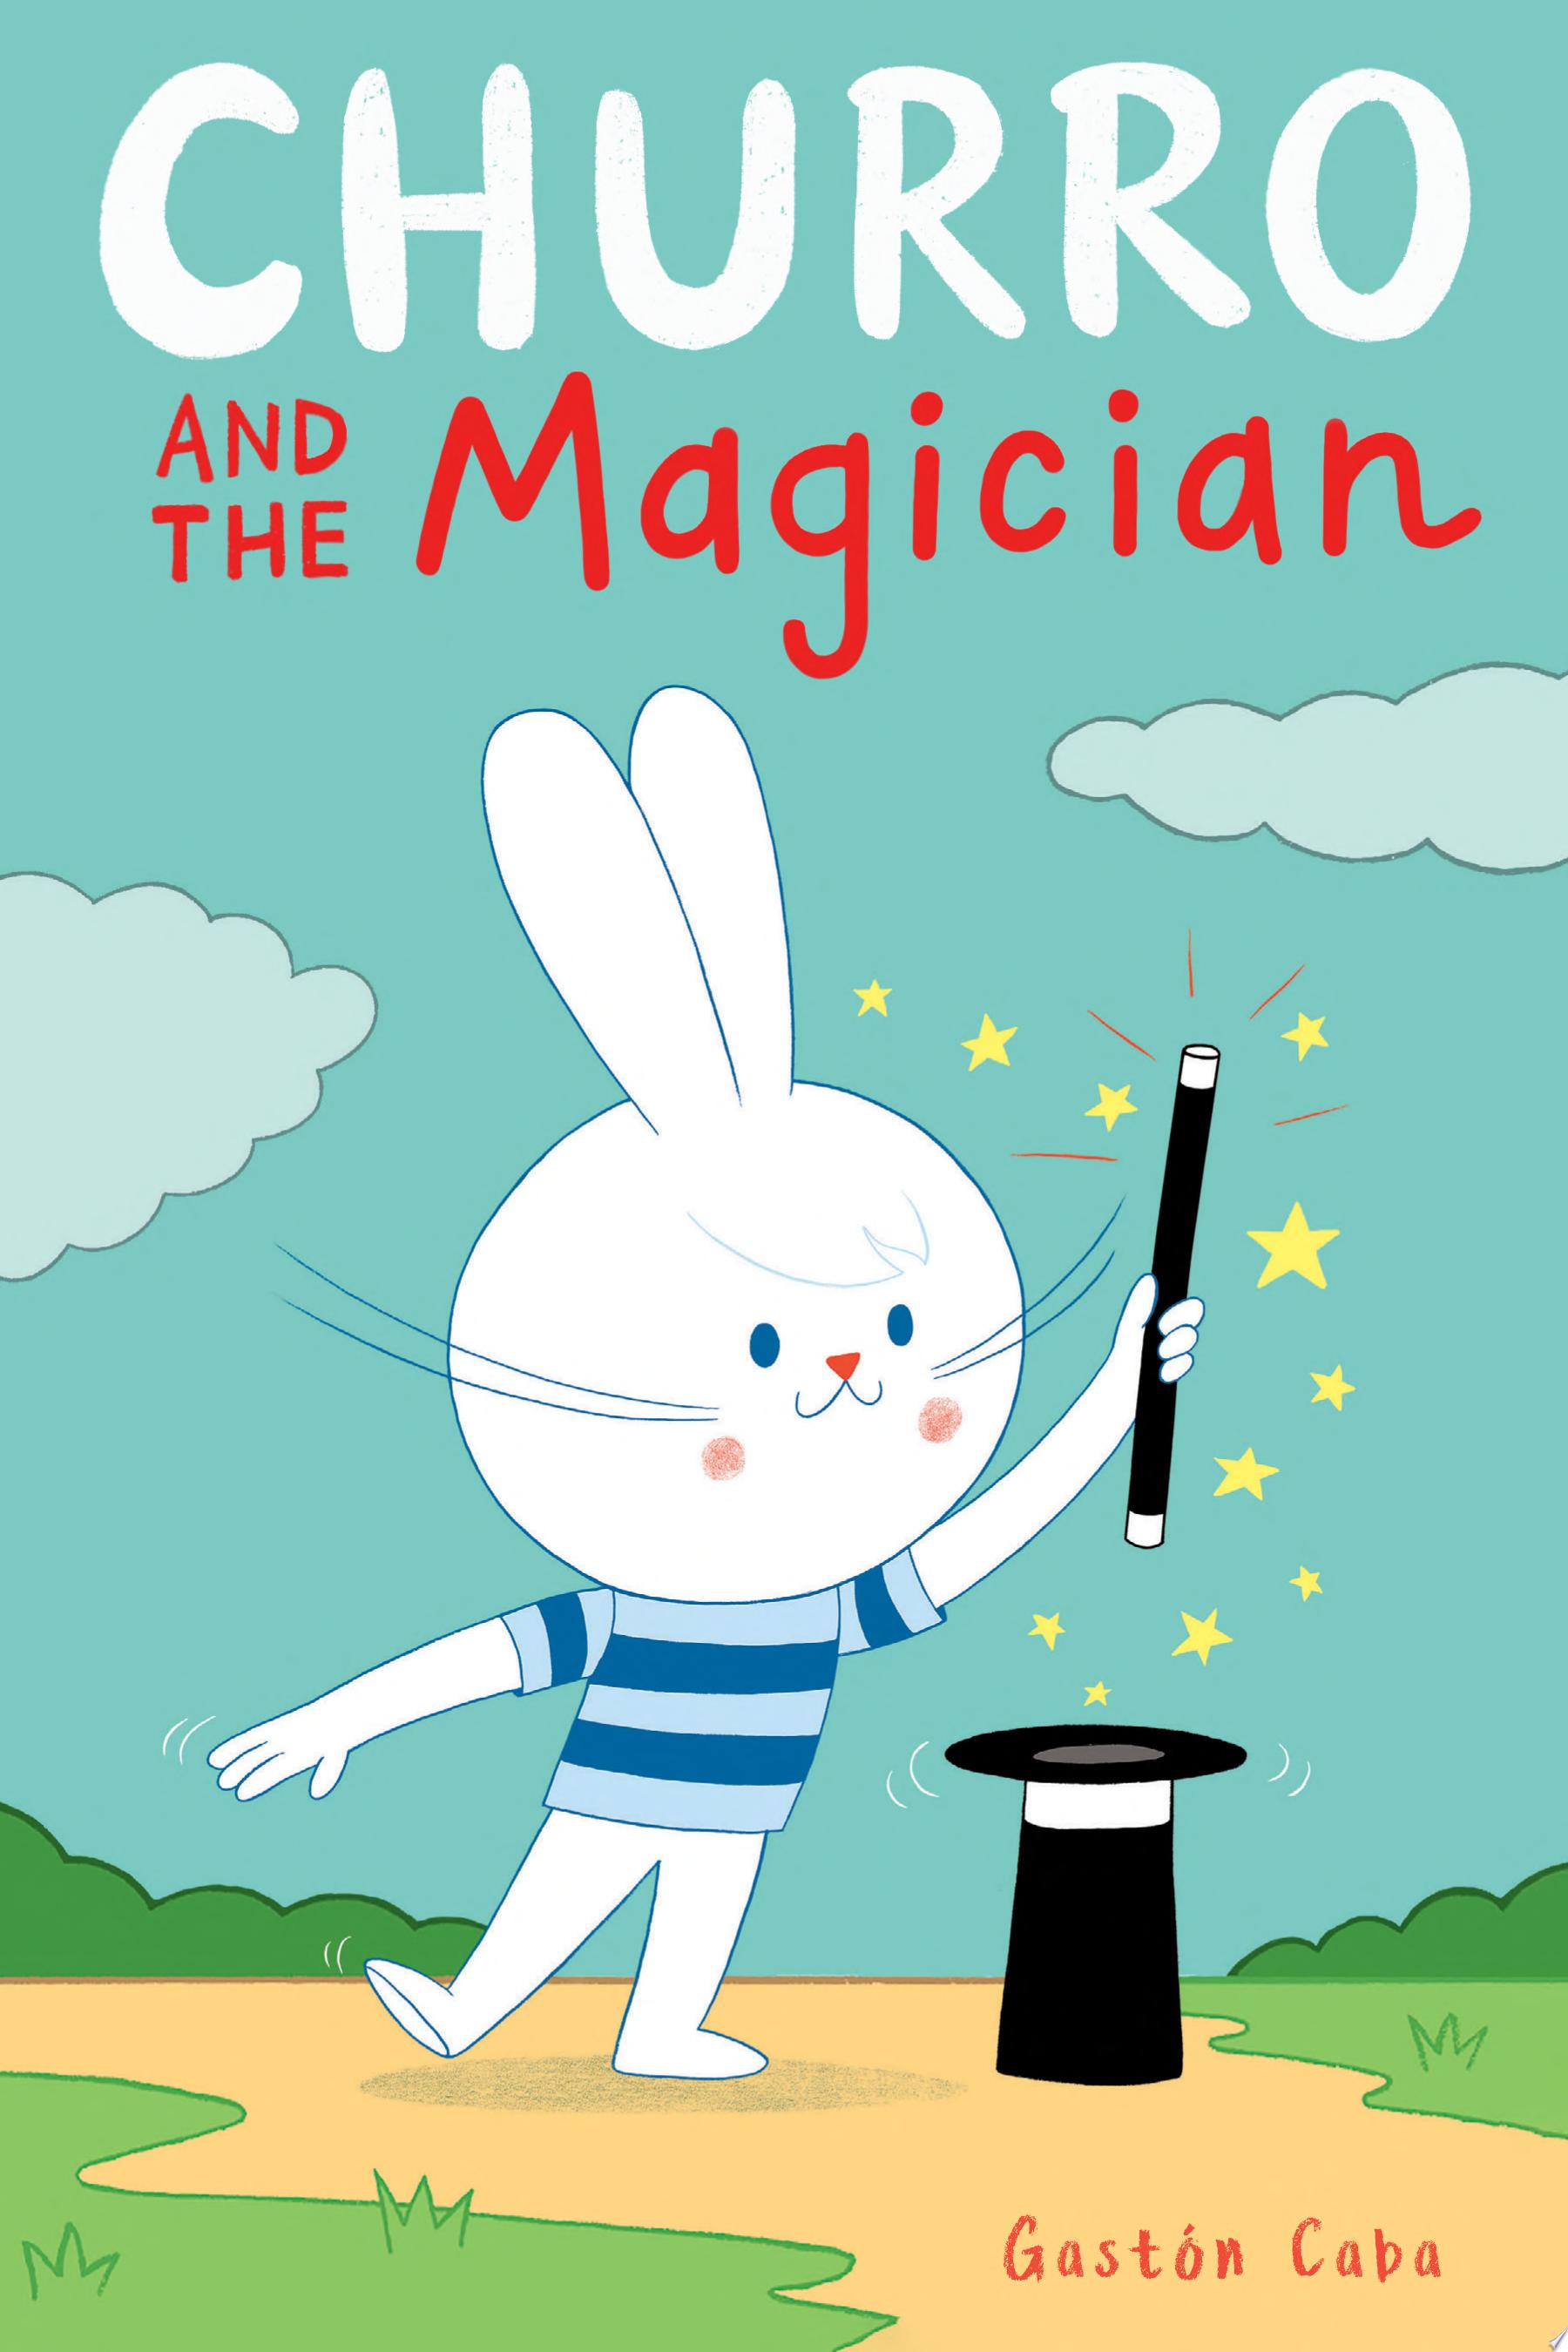 Image for "Churro and the Magician"